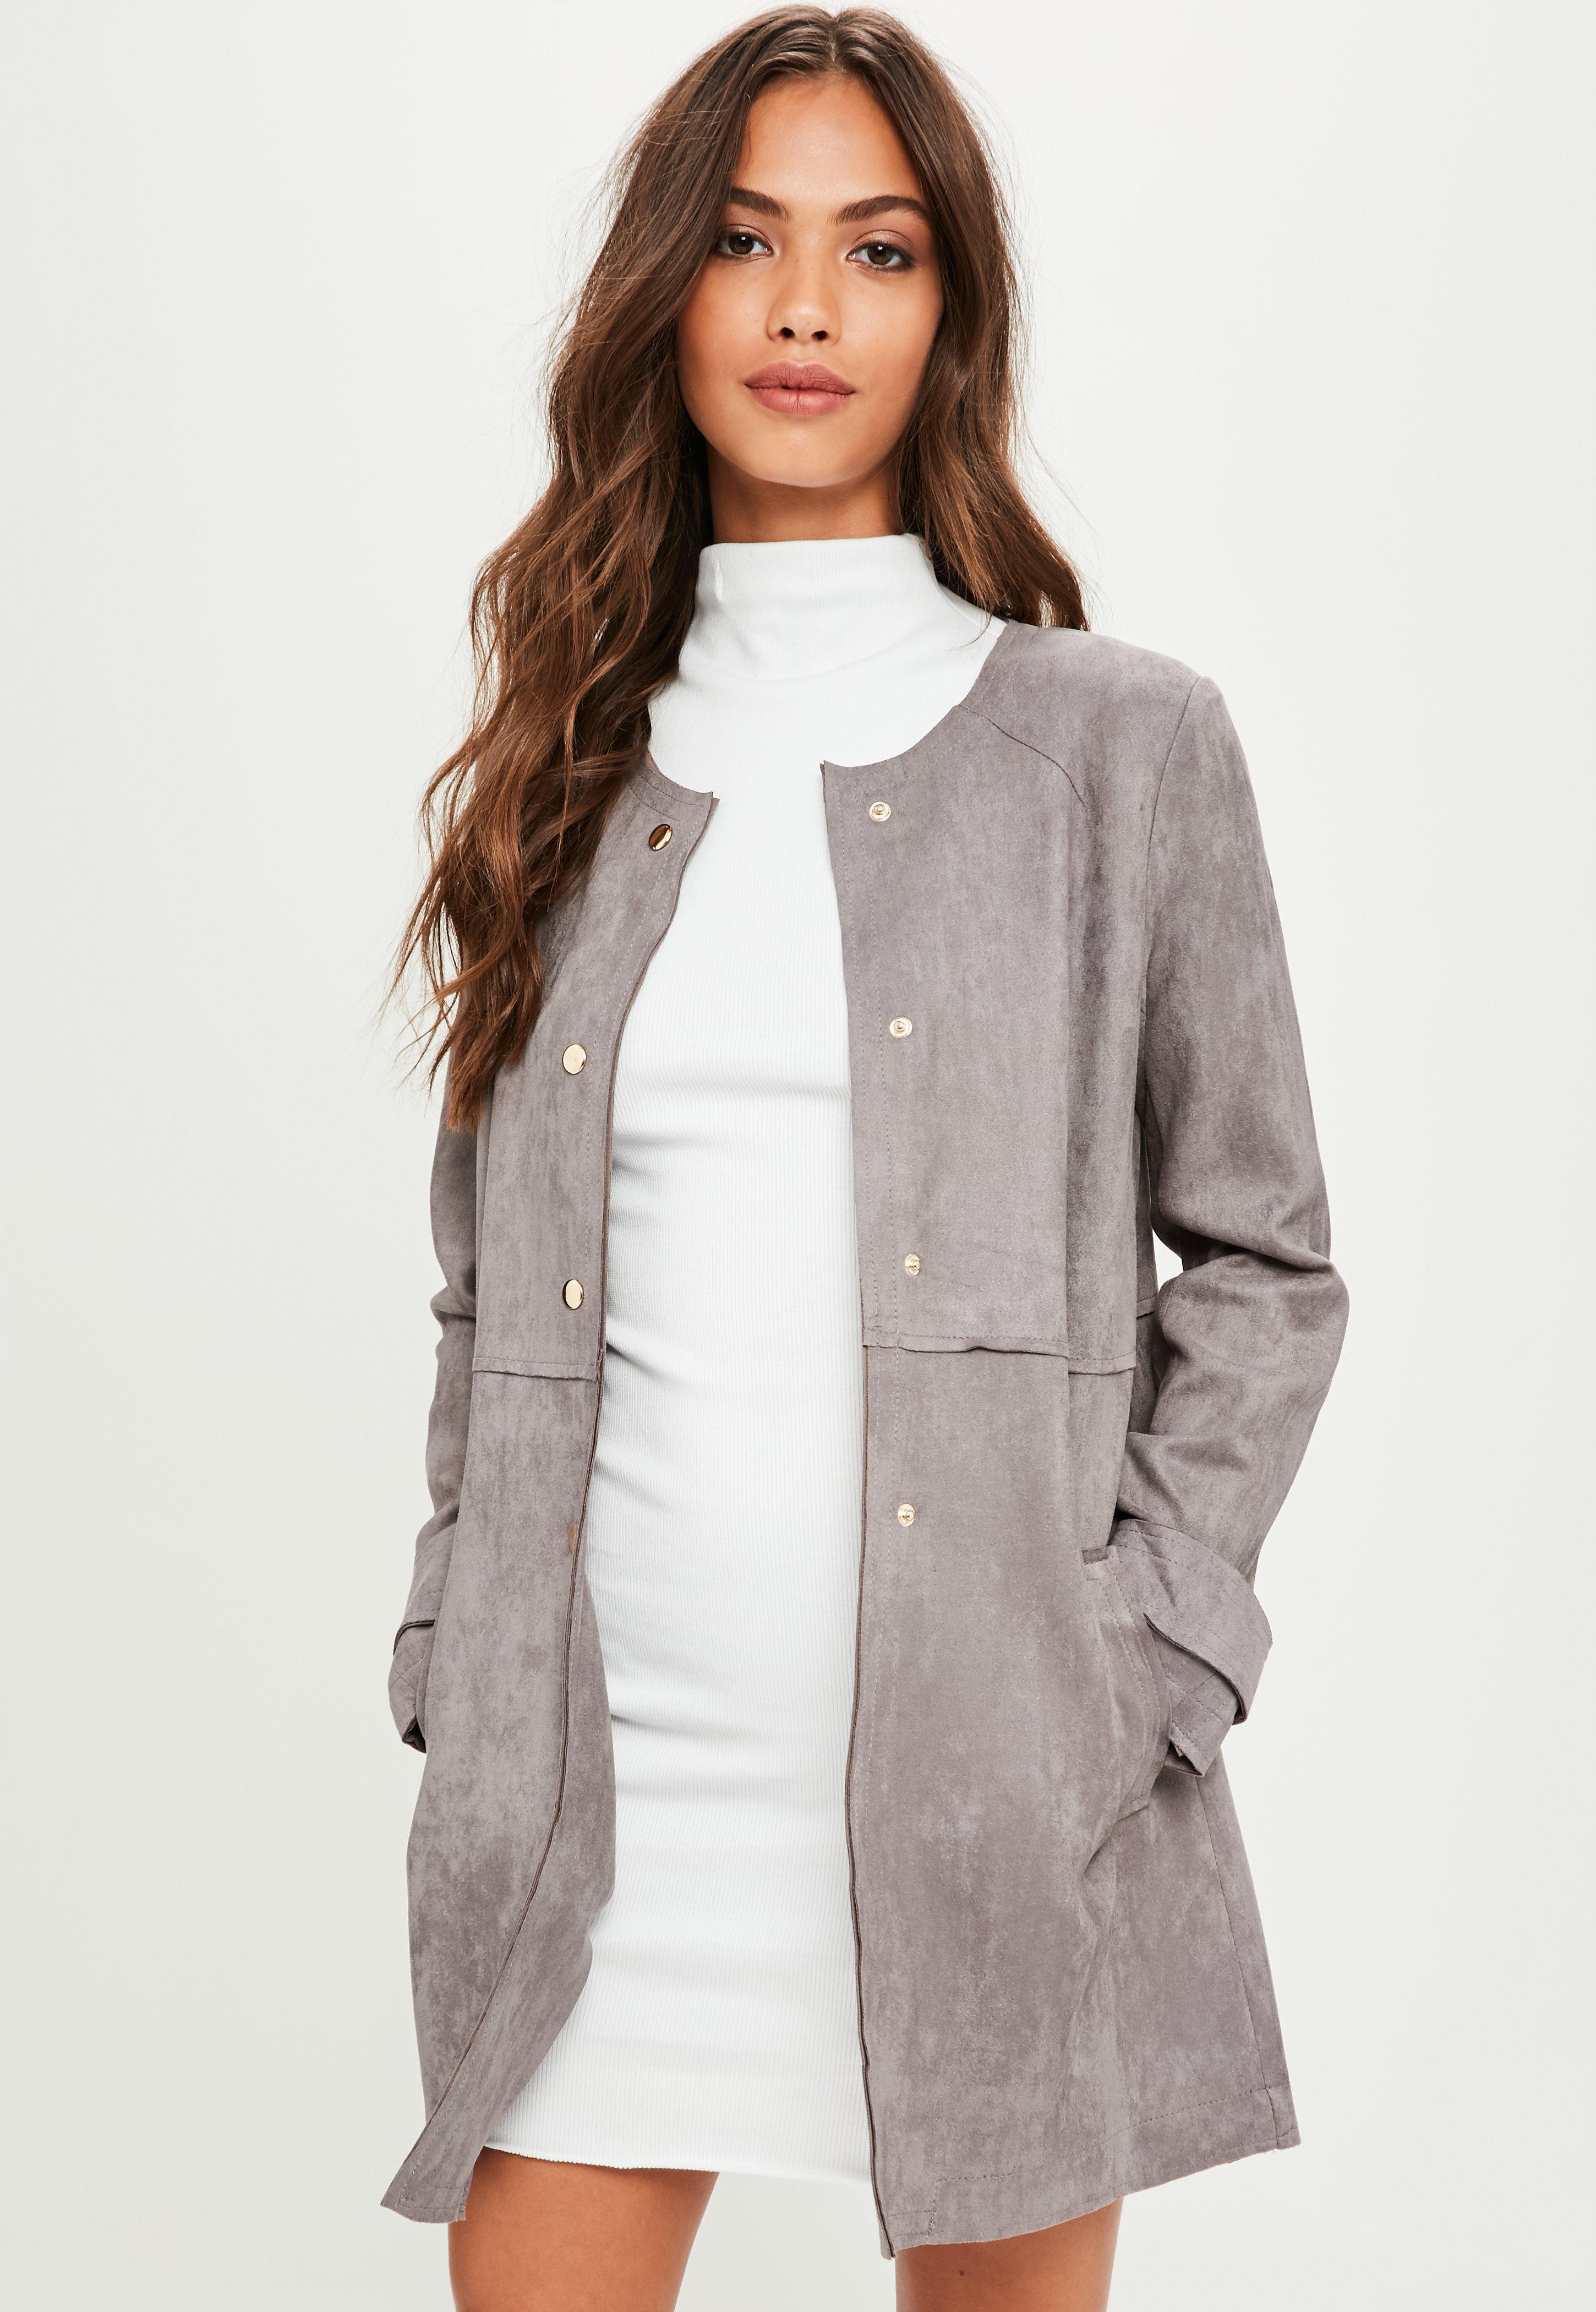 Lyst - Missguided Grey Faux Suede Collarless Jacket in Gray